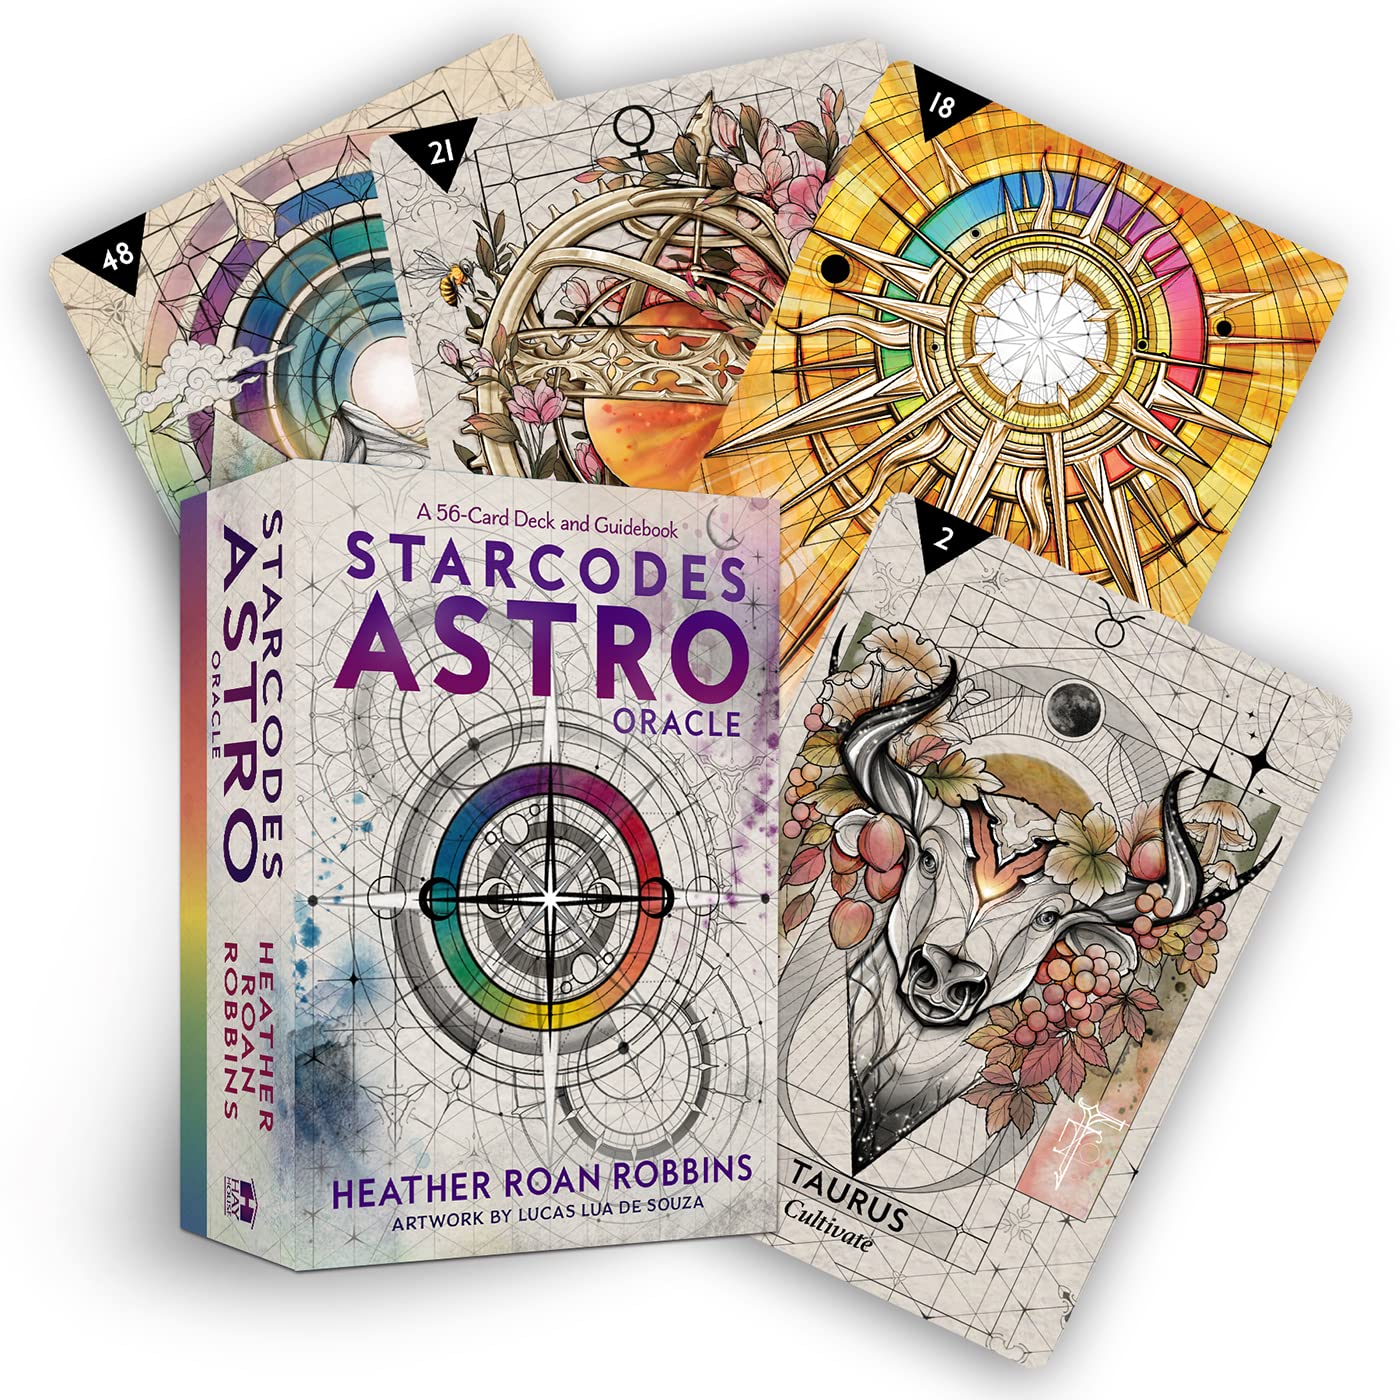 Starcodes Astro Oracle: A 56-Card Deck and Guidebook || Heather Roan Robbins